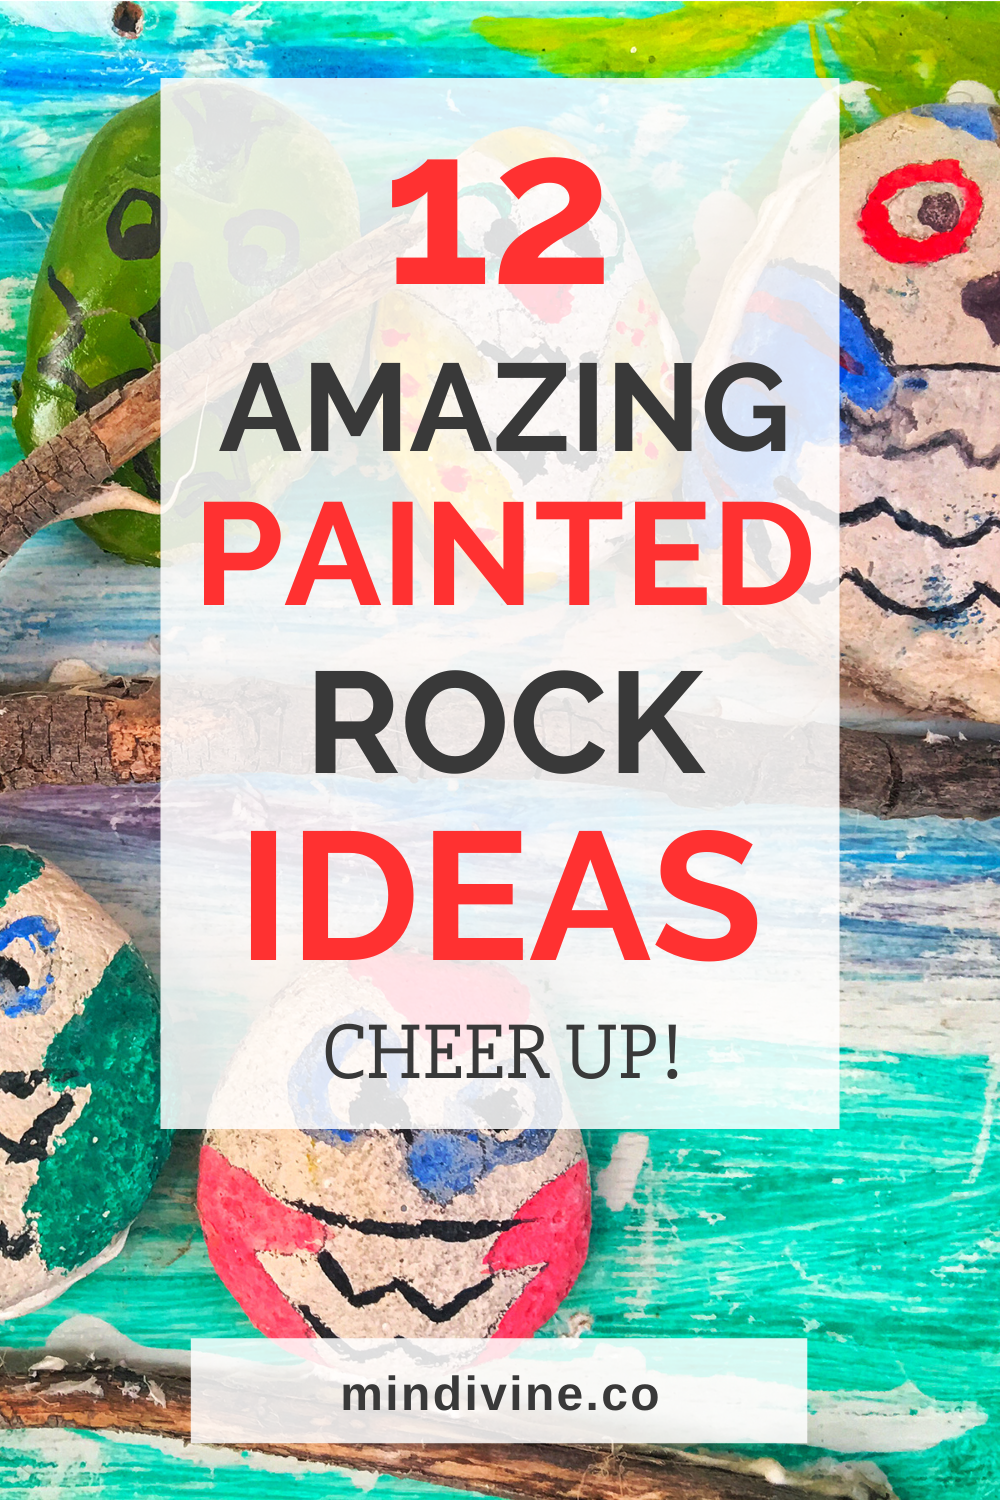 Hand-painted rocks with drawings of different colors.